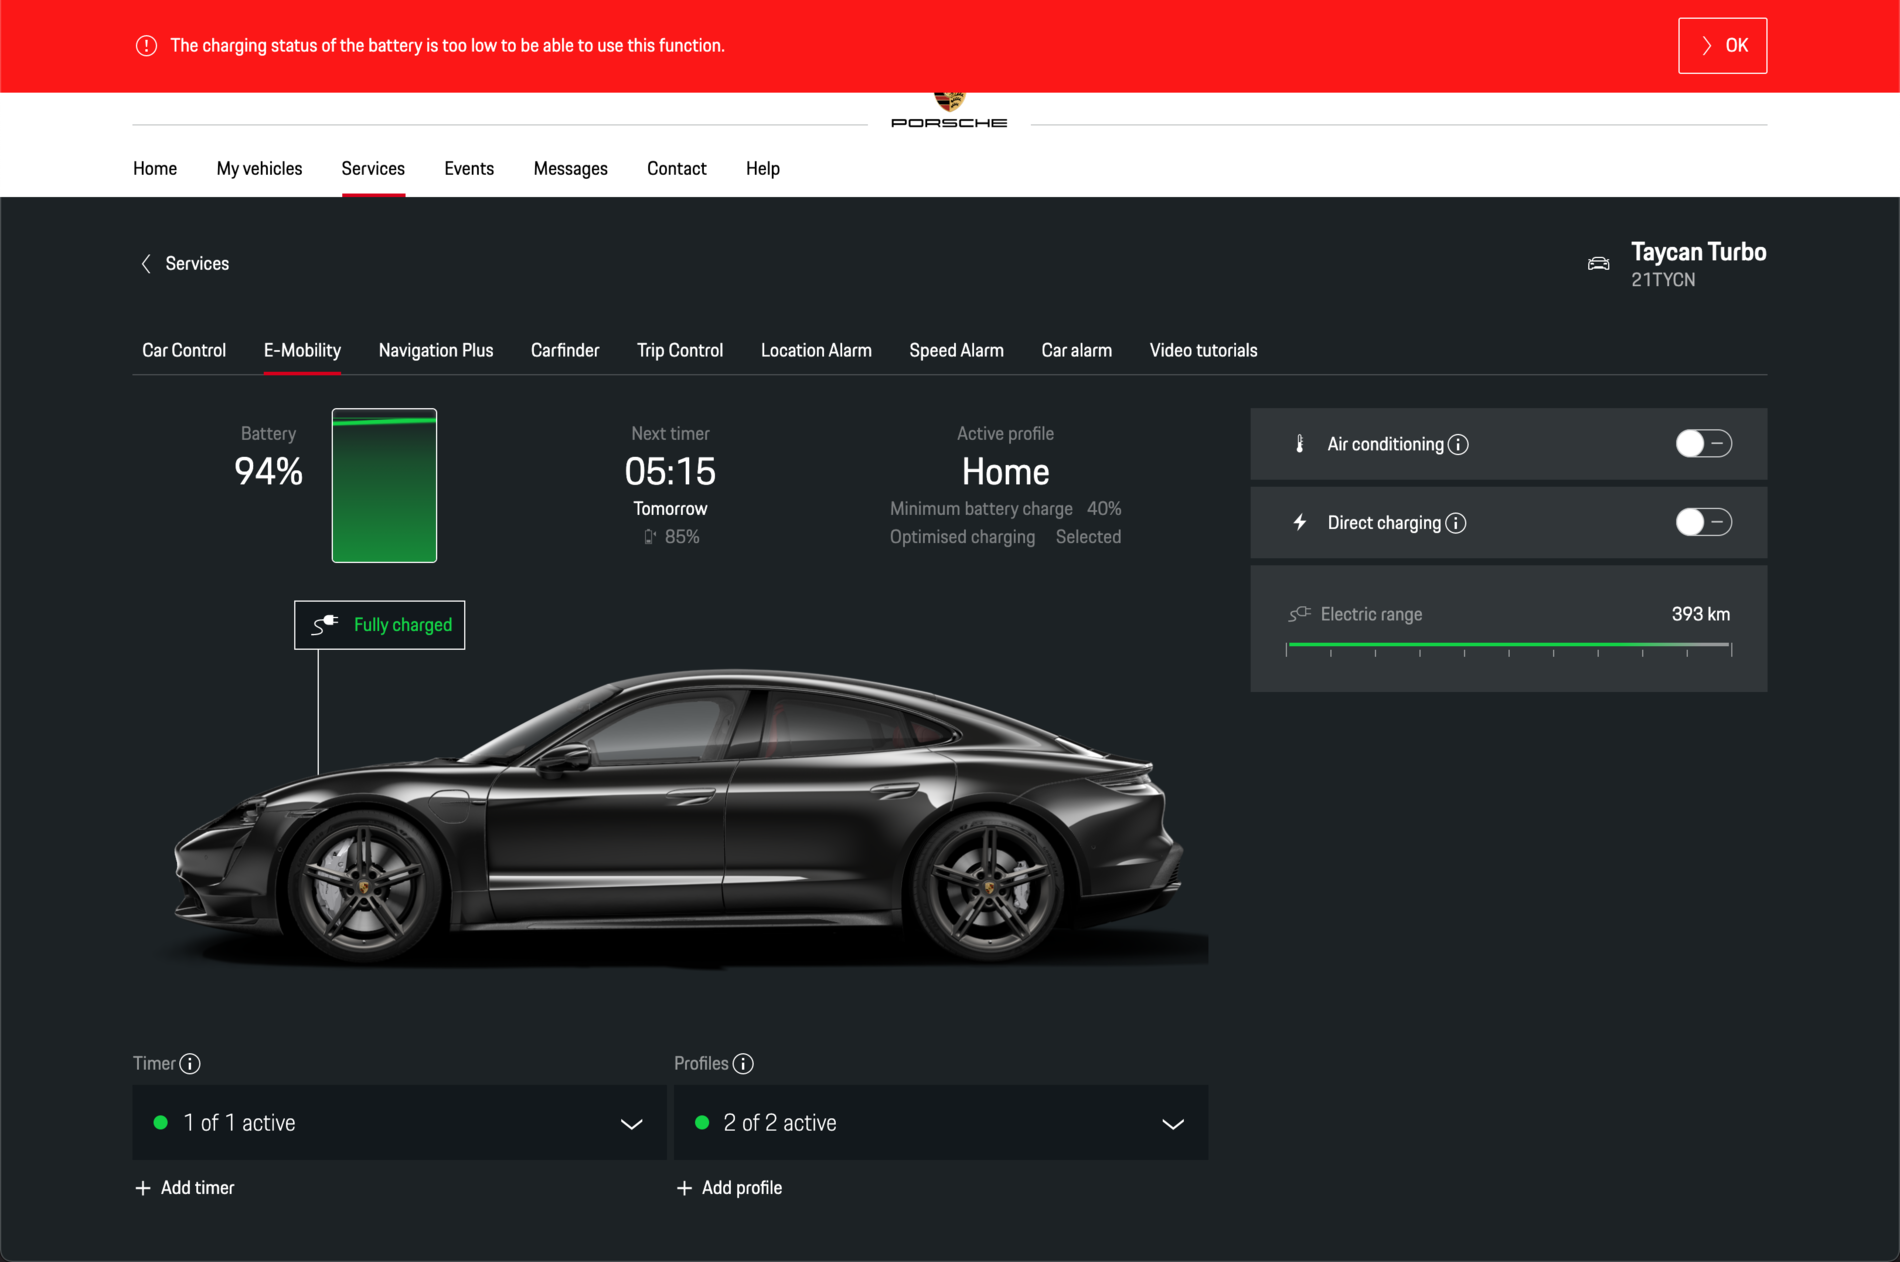 Porsche Taycan Taycan charges to 100% despite profile Screen Shot 2021-04-06 at 8.07.47 am